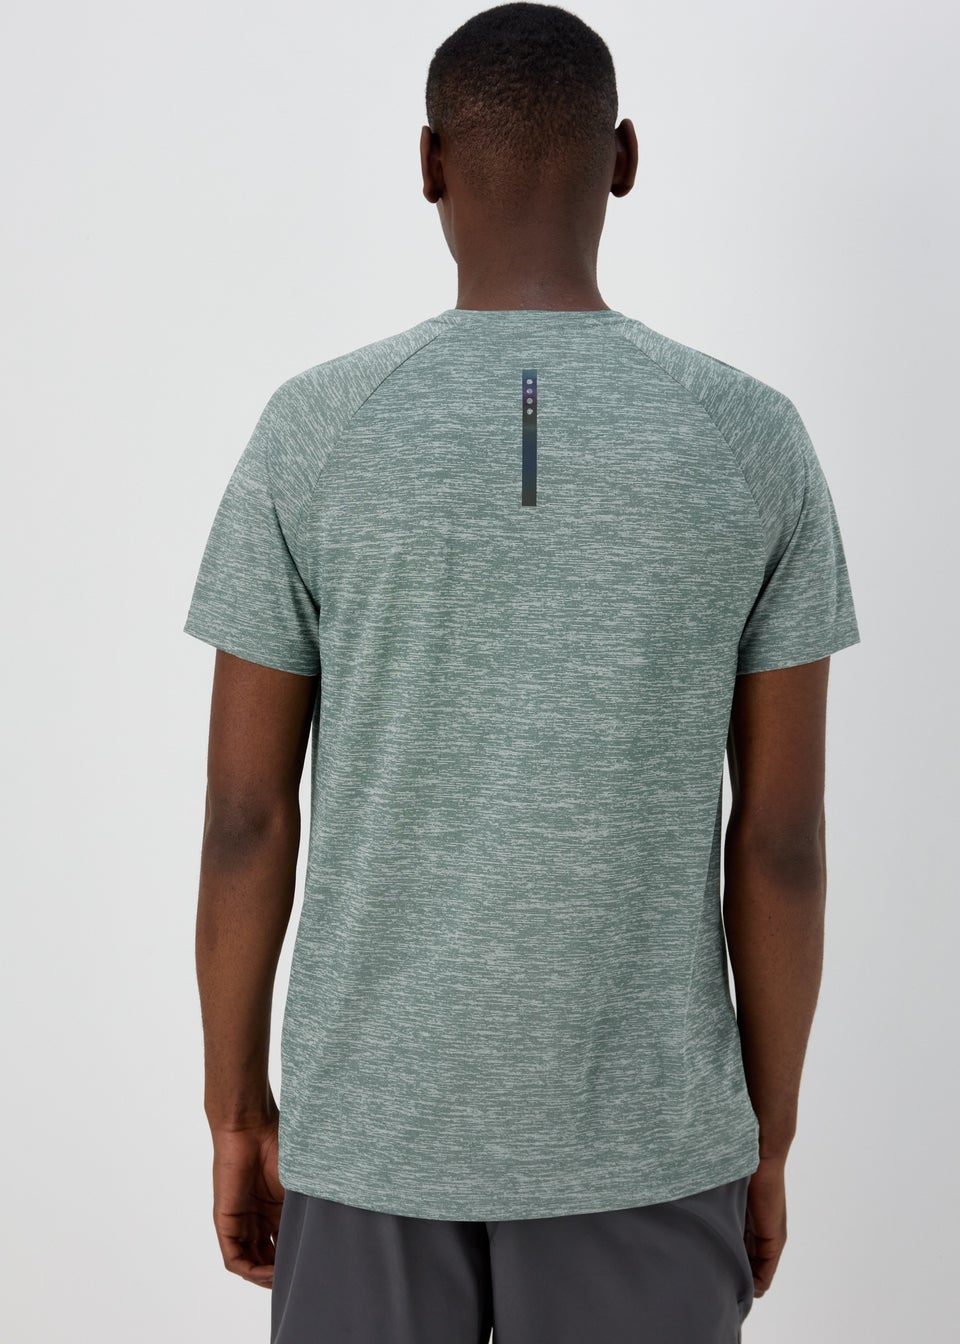 Souluxe Teal 2 Tone Essential T-Shirt